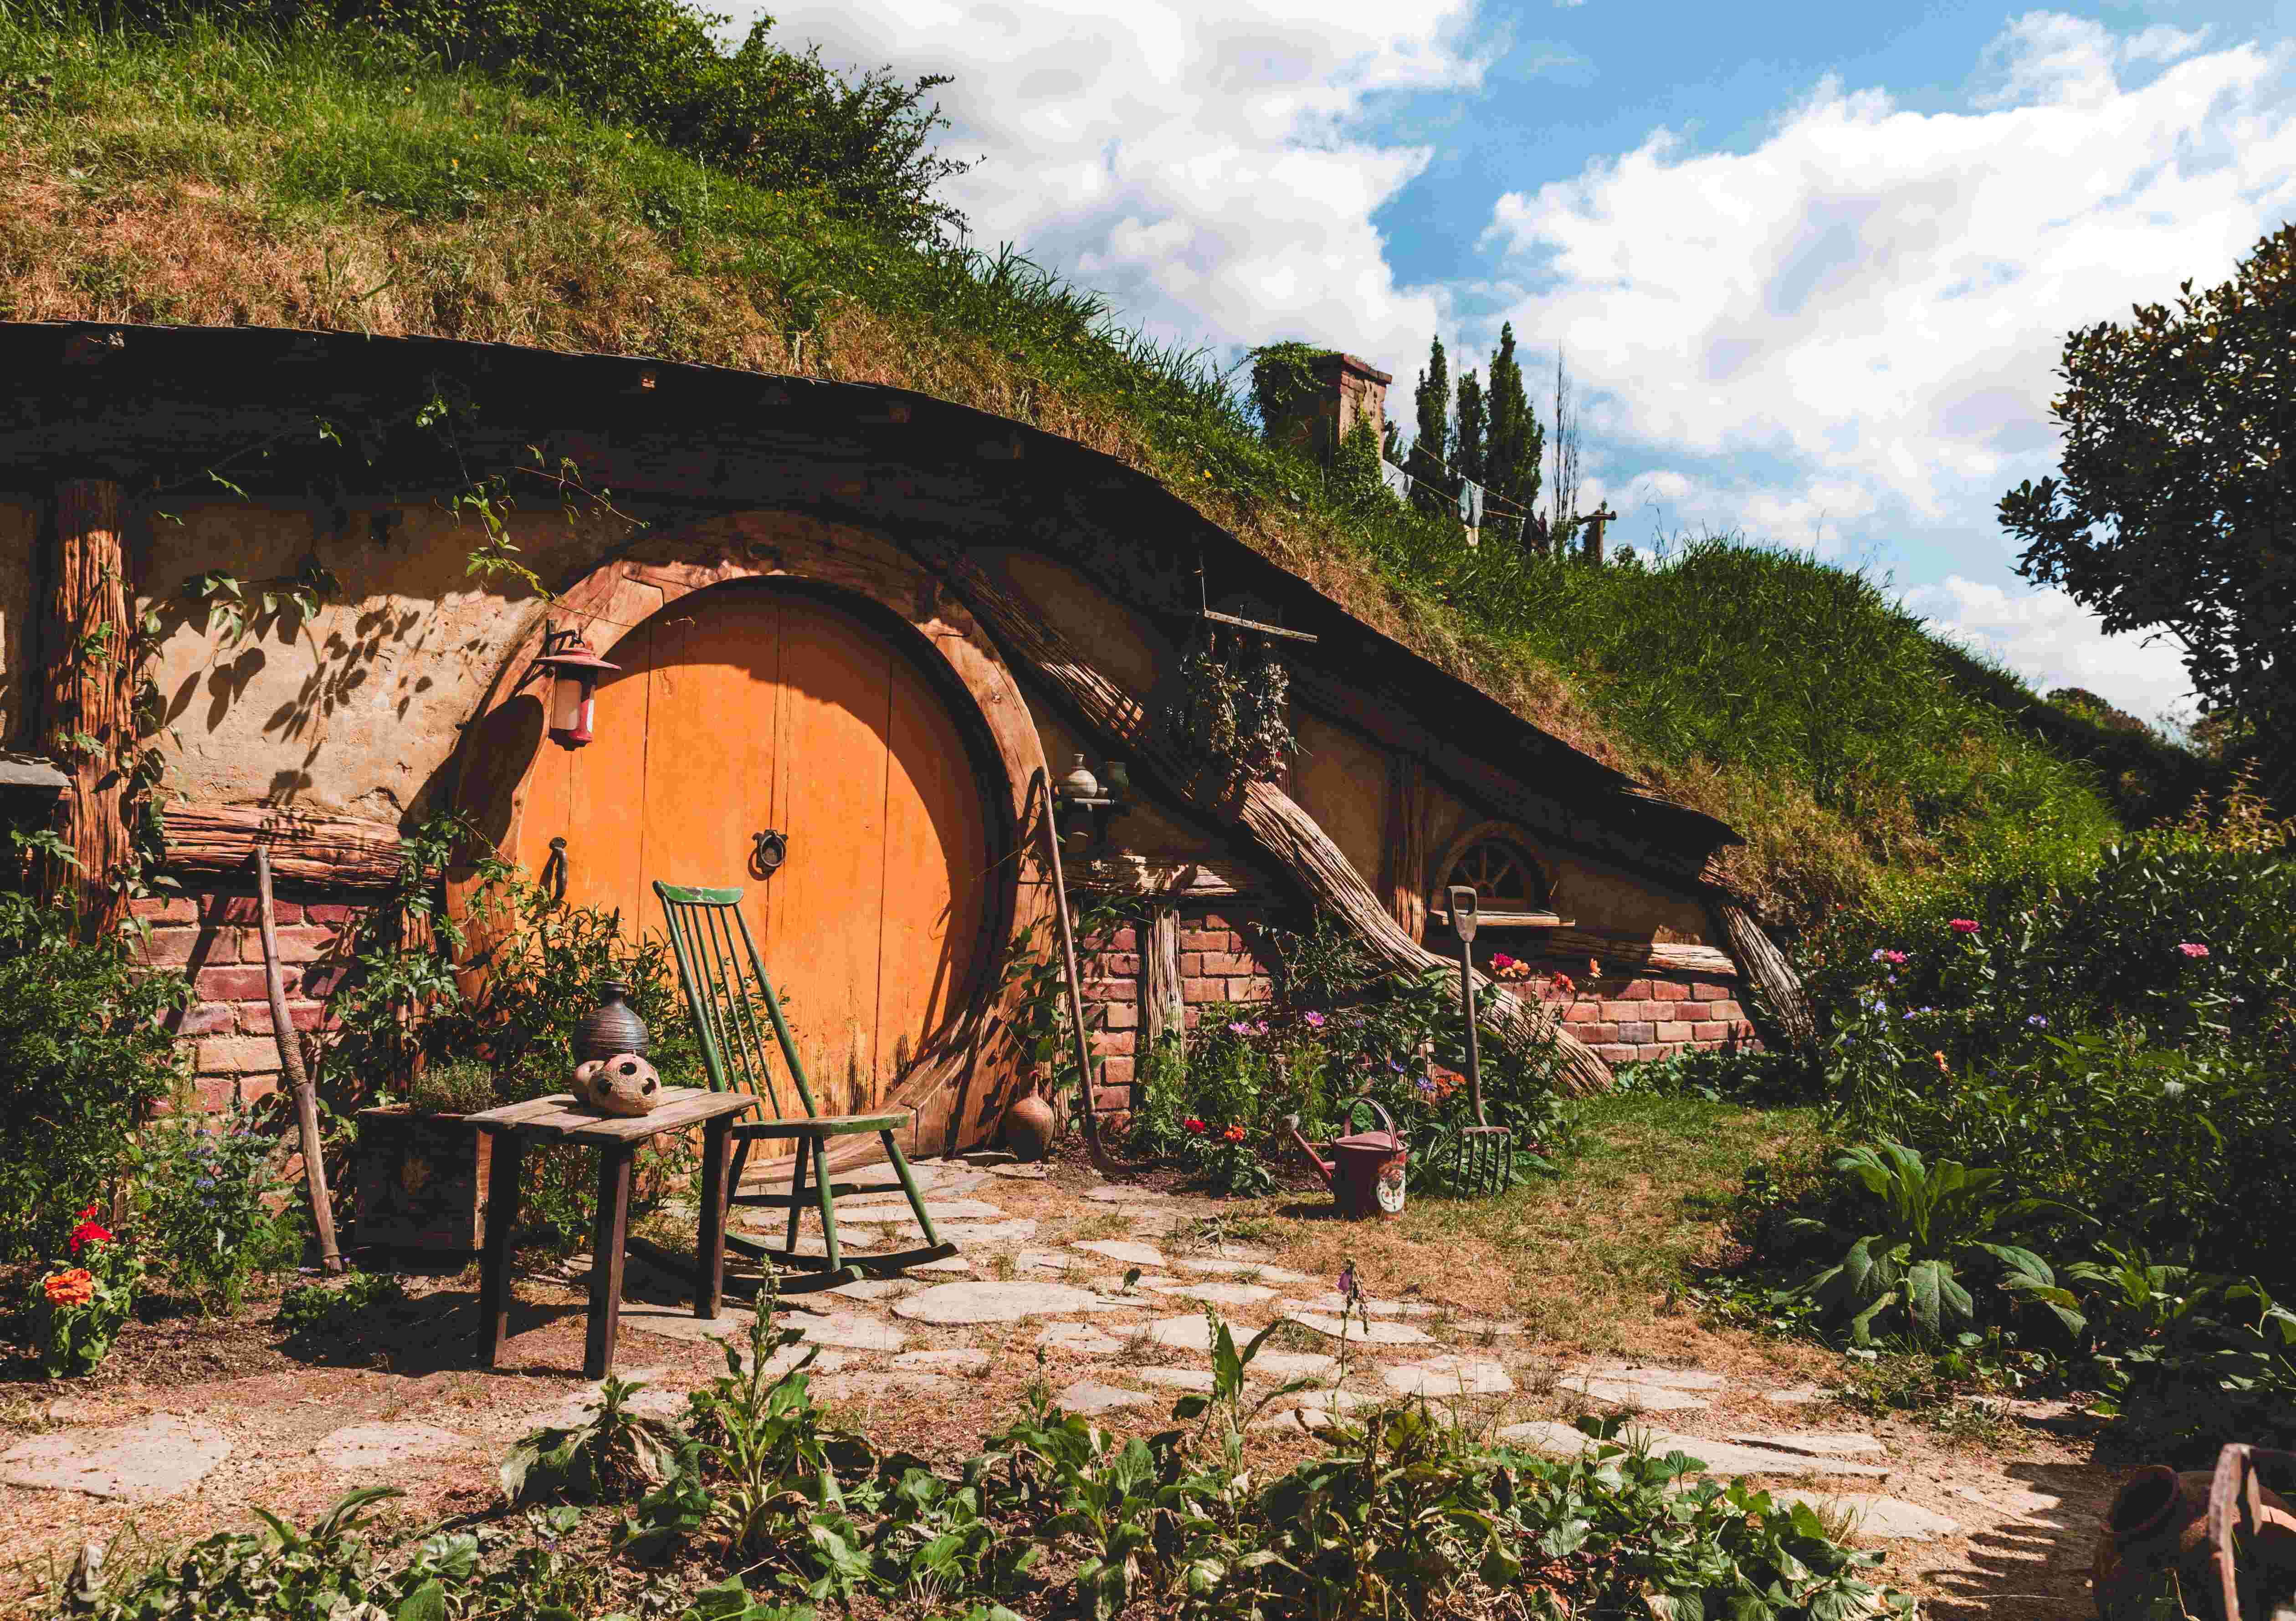 lord of the rings set